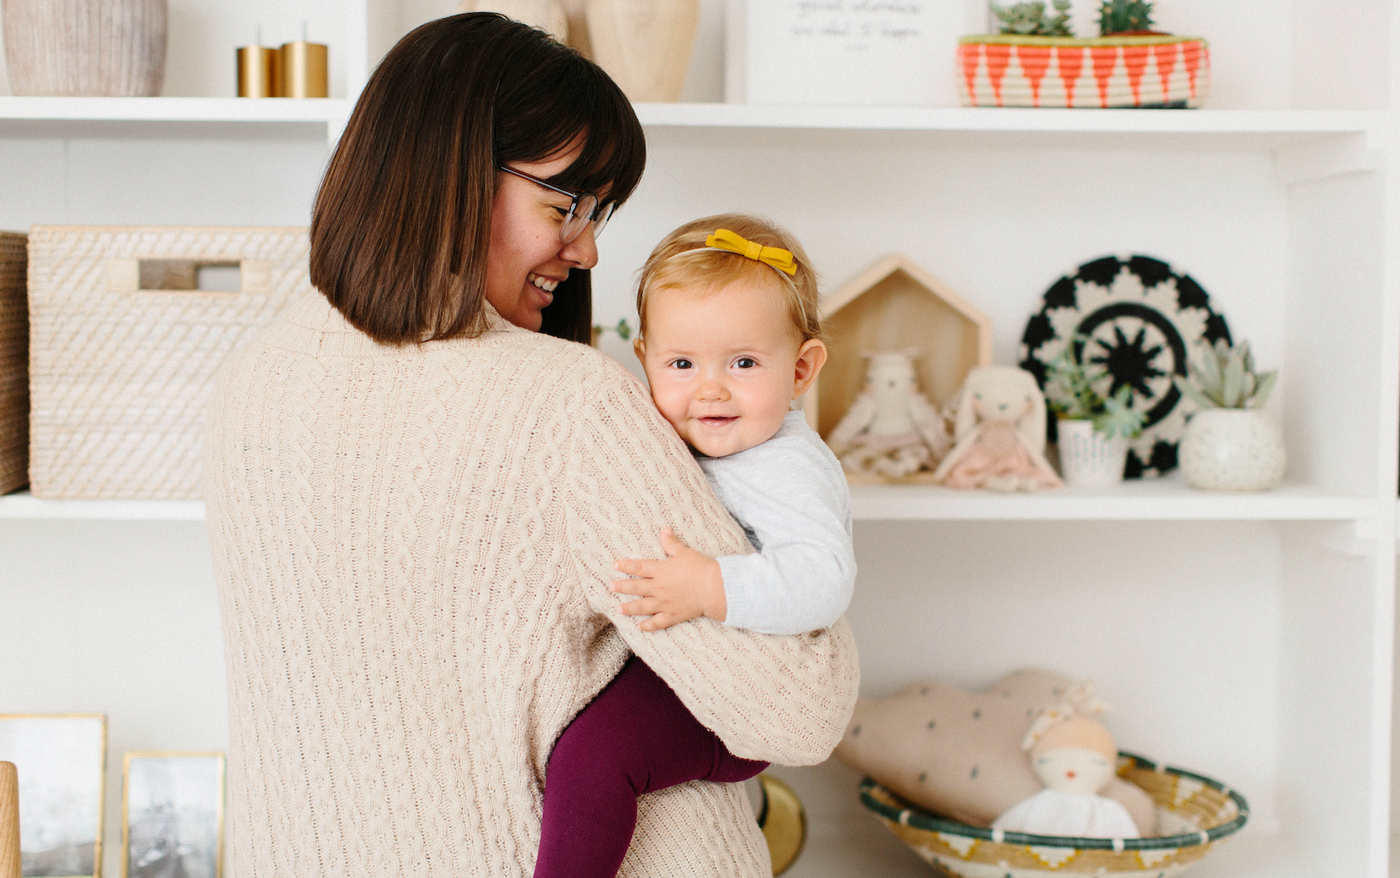 A Safari-Inspired Nursery: The Fair Trade, Handmade Items You Need for Your Child's Bedroom